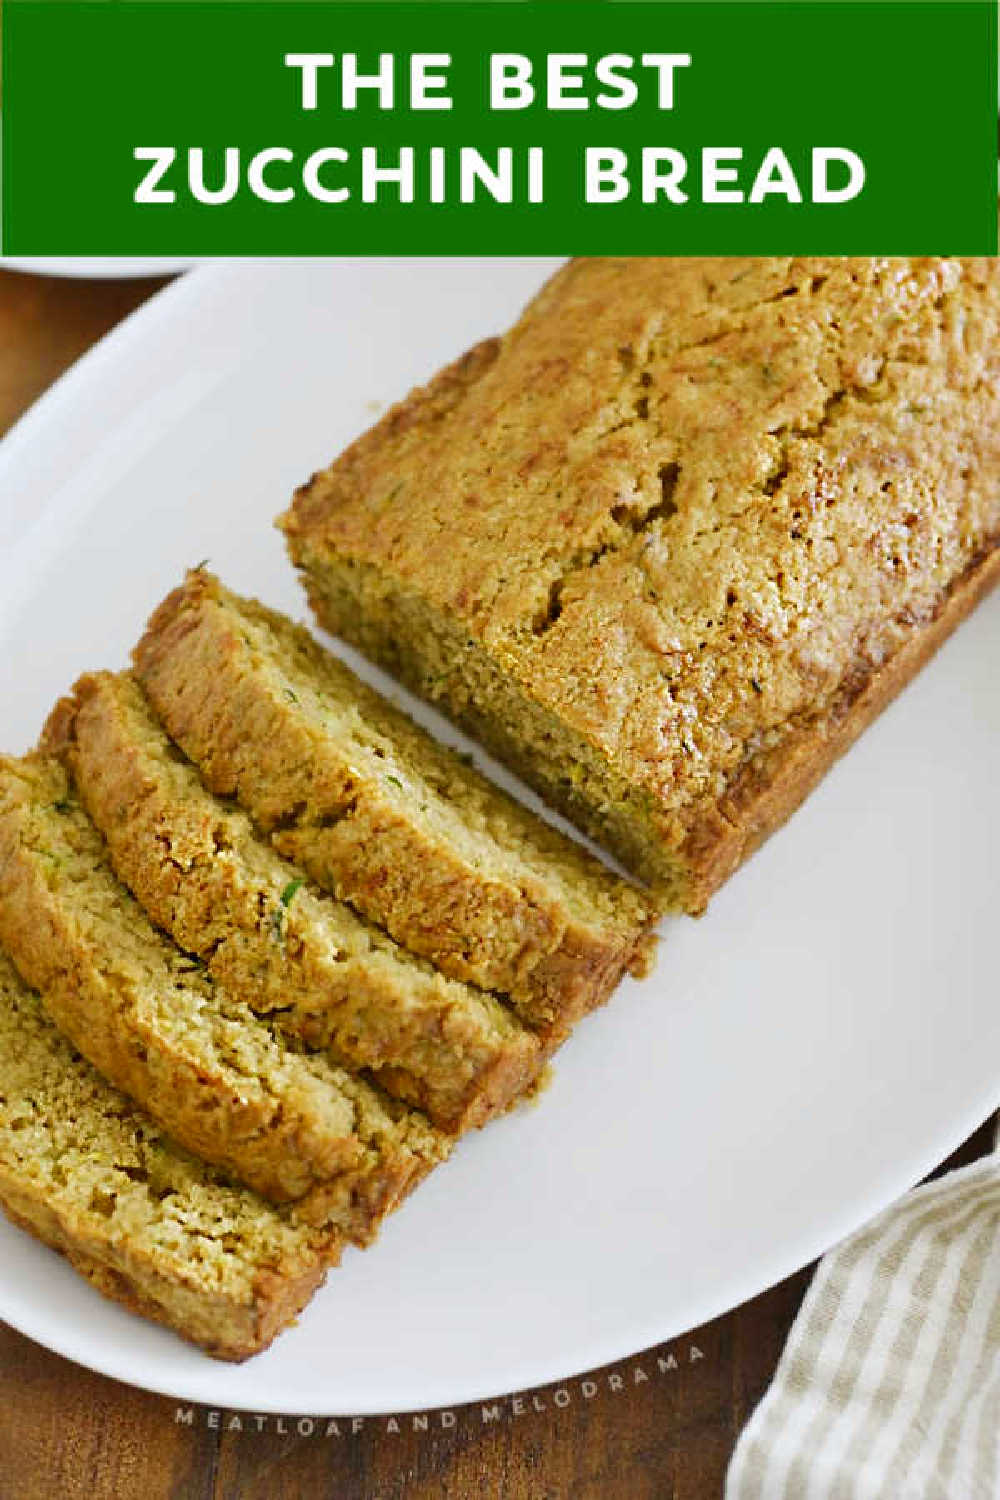 Make the BEST Zucchini Bread ever with this easy old fashioned zucchini bread recipe. It's moist, delicious and turns out perfect every time! Classic zucchini bread is a terrific way to use up extra zucchini! via @meamel